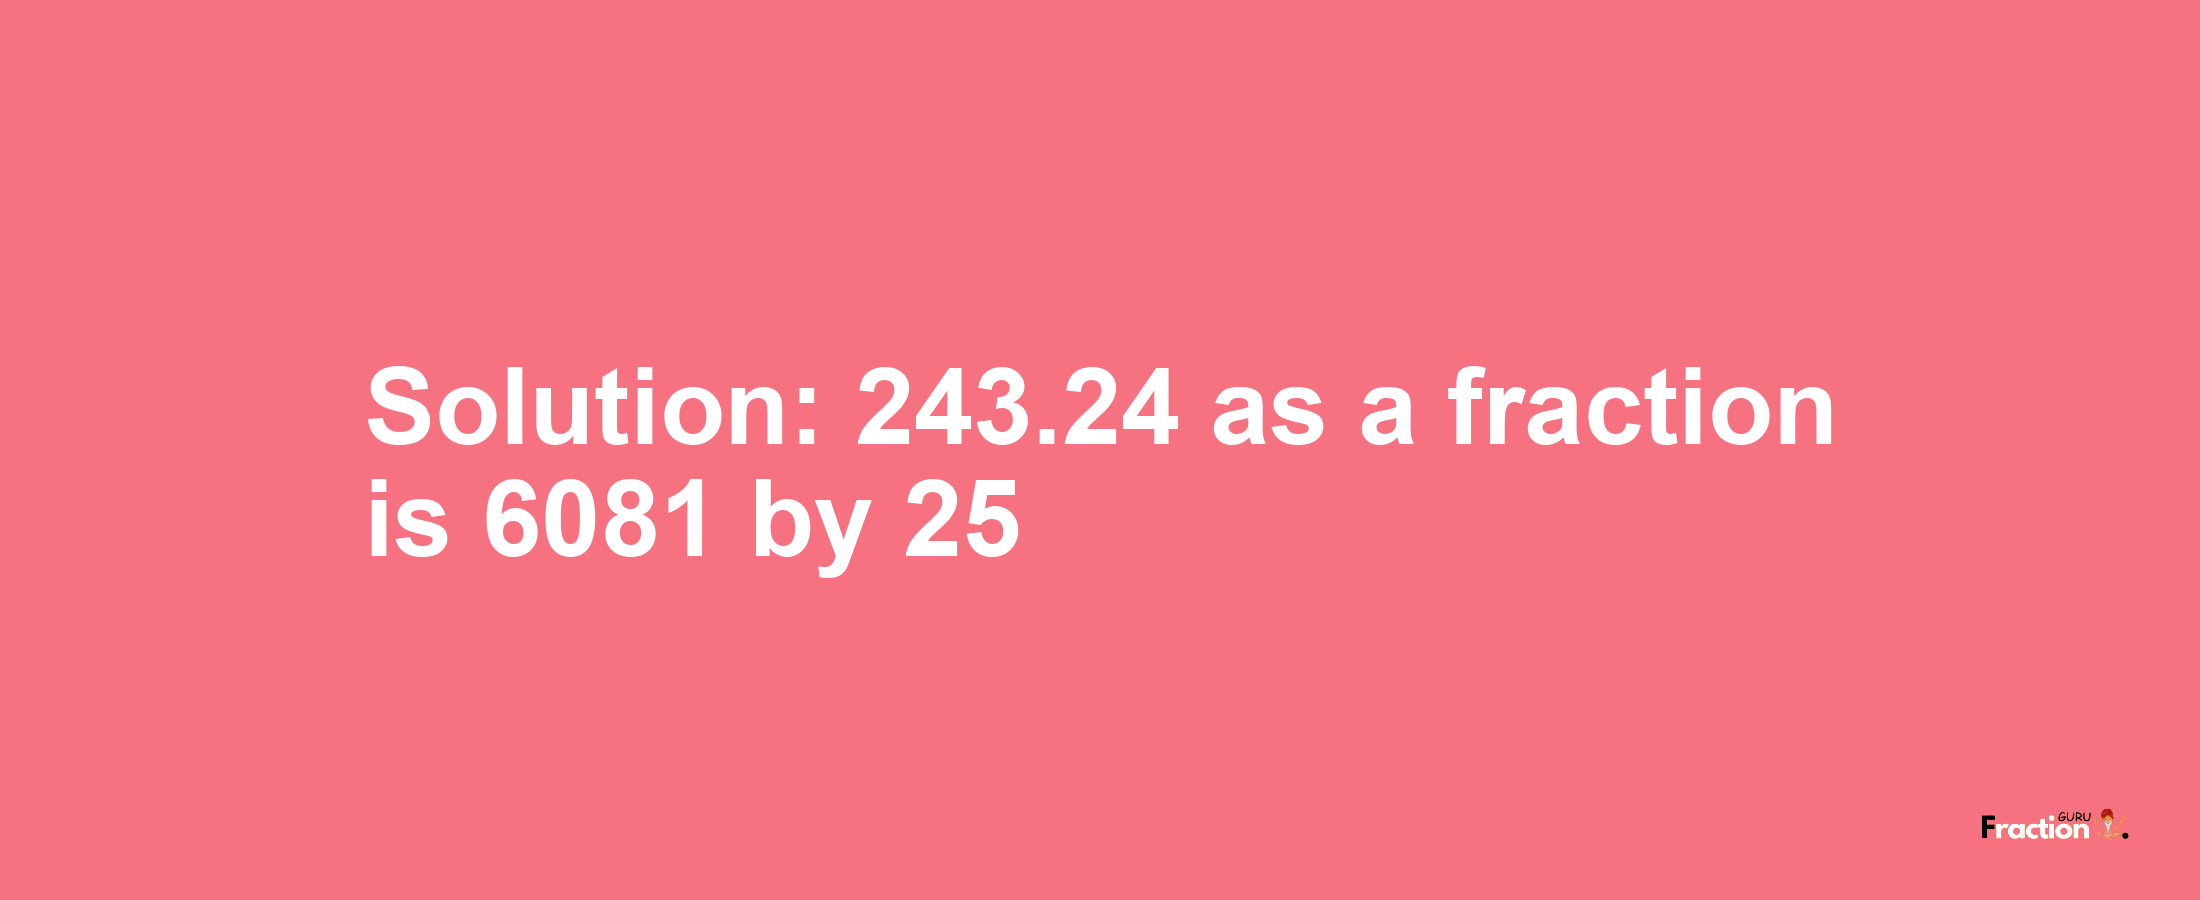 Solution:243.24 as a fraction is 6081/25